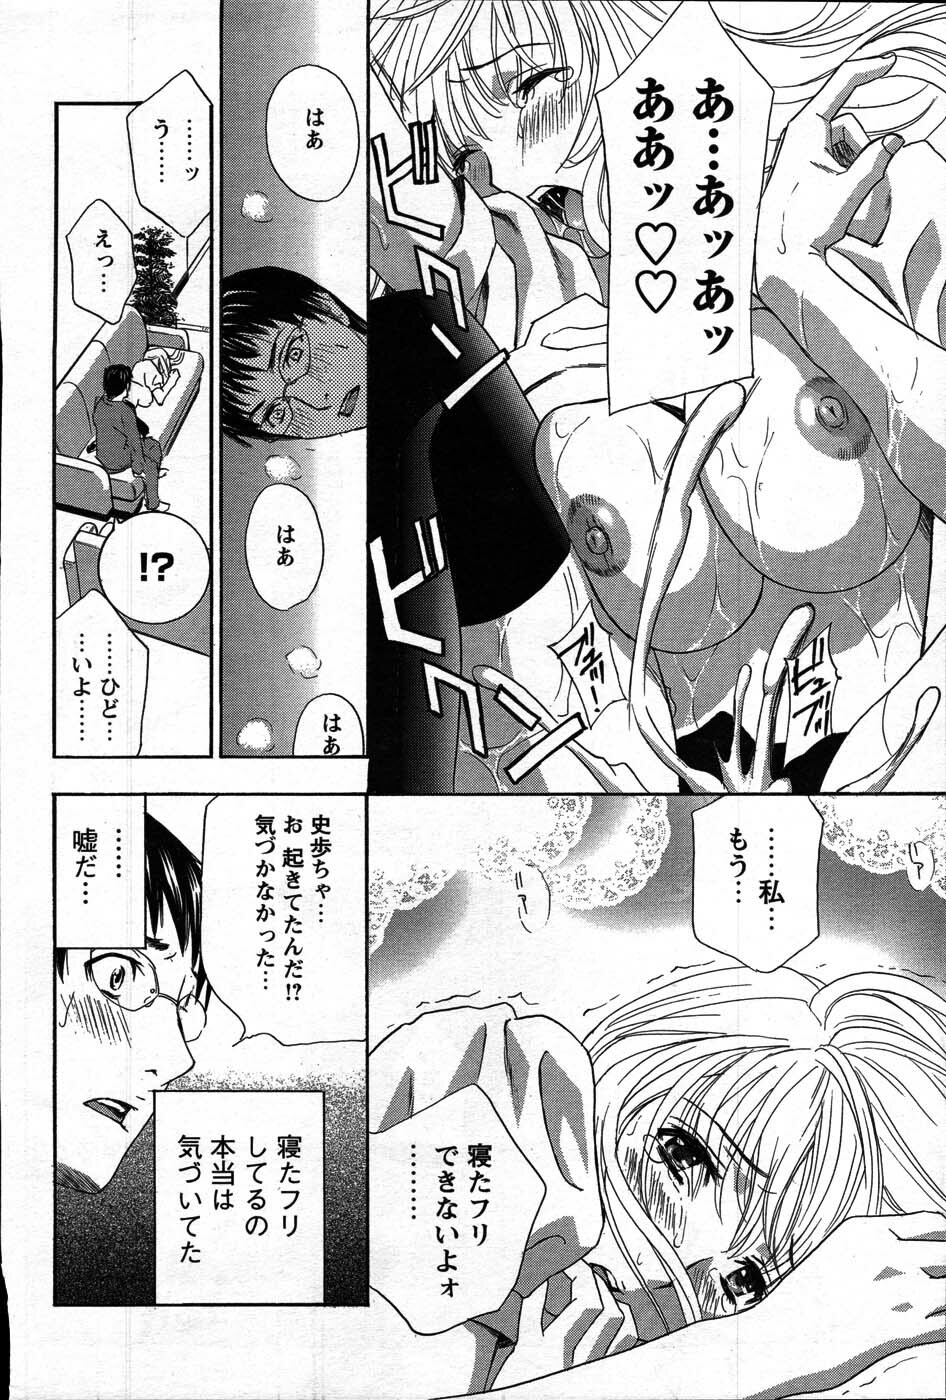 Comic Mens Young Special IKAZUCHI vol. 2 page 20 full